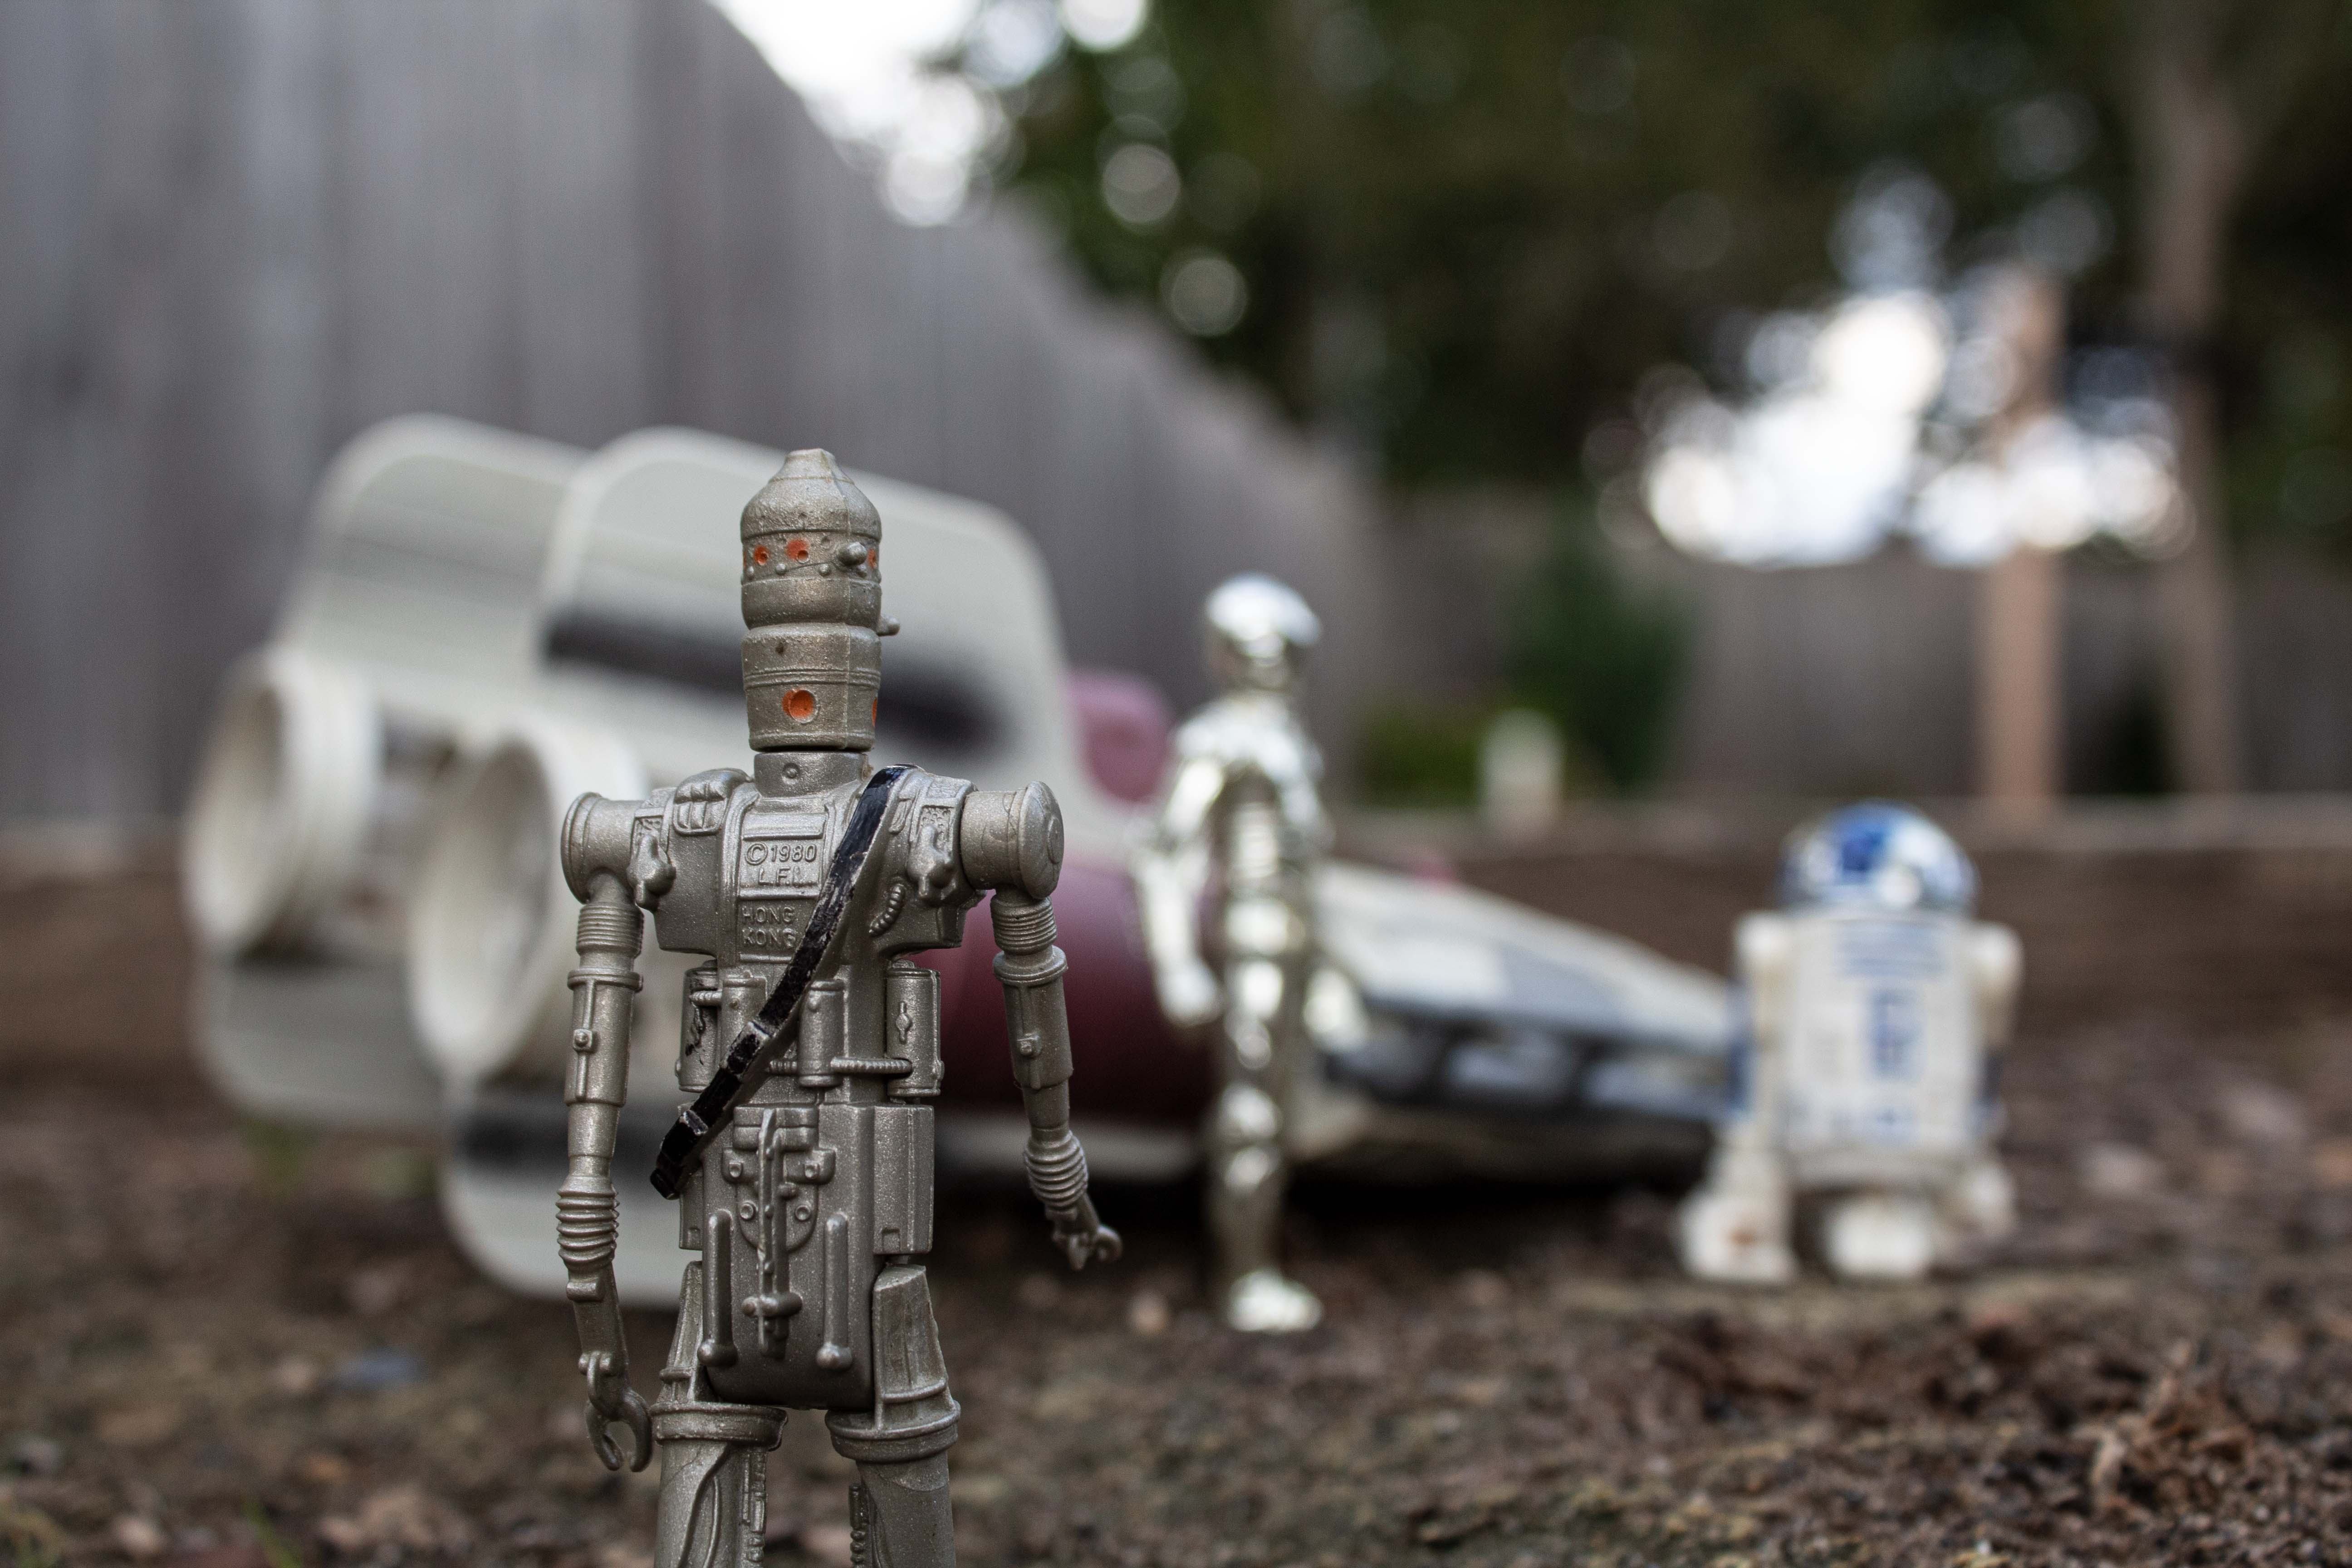 action figures shot at a low angle to make them look life like. 3-CPO is standing right infront of the camera lens with a blurred background of a ship and two other figures.